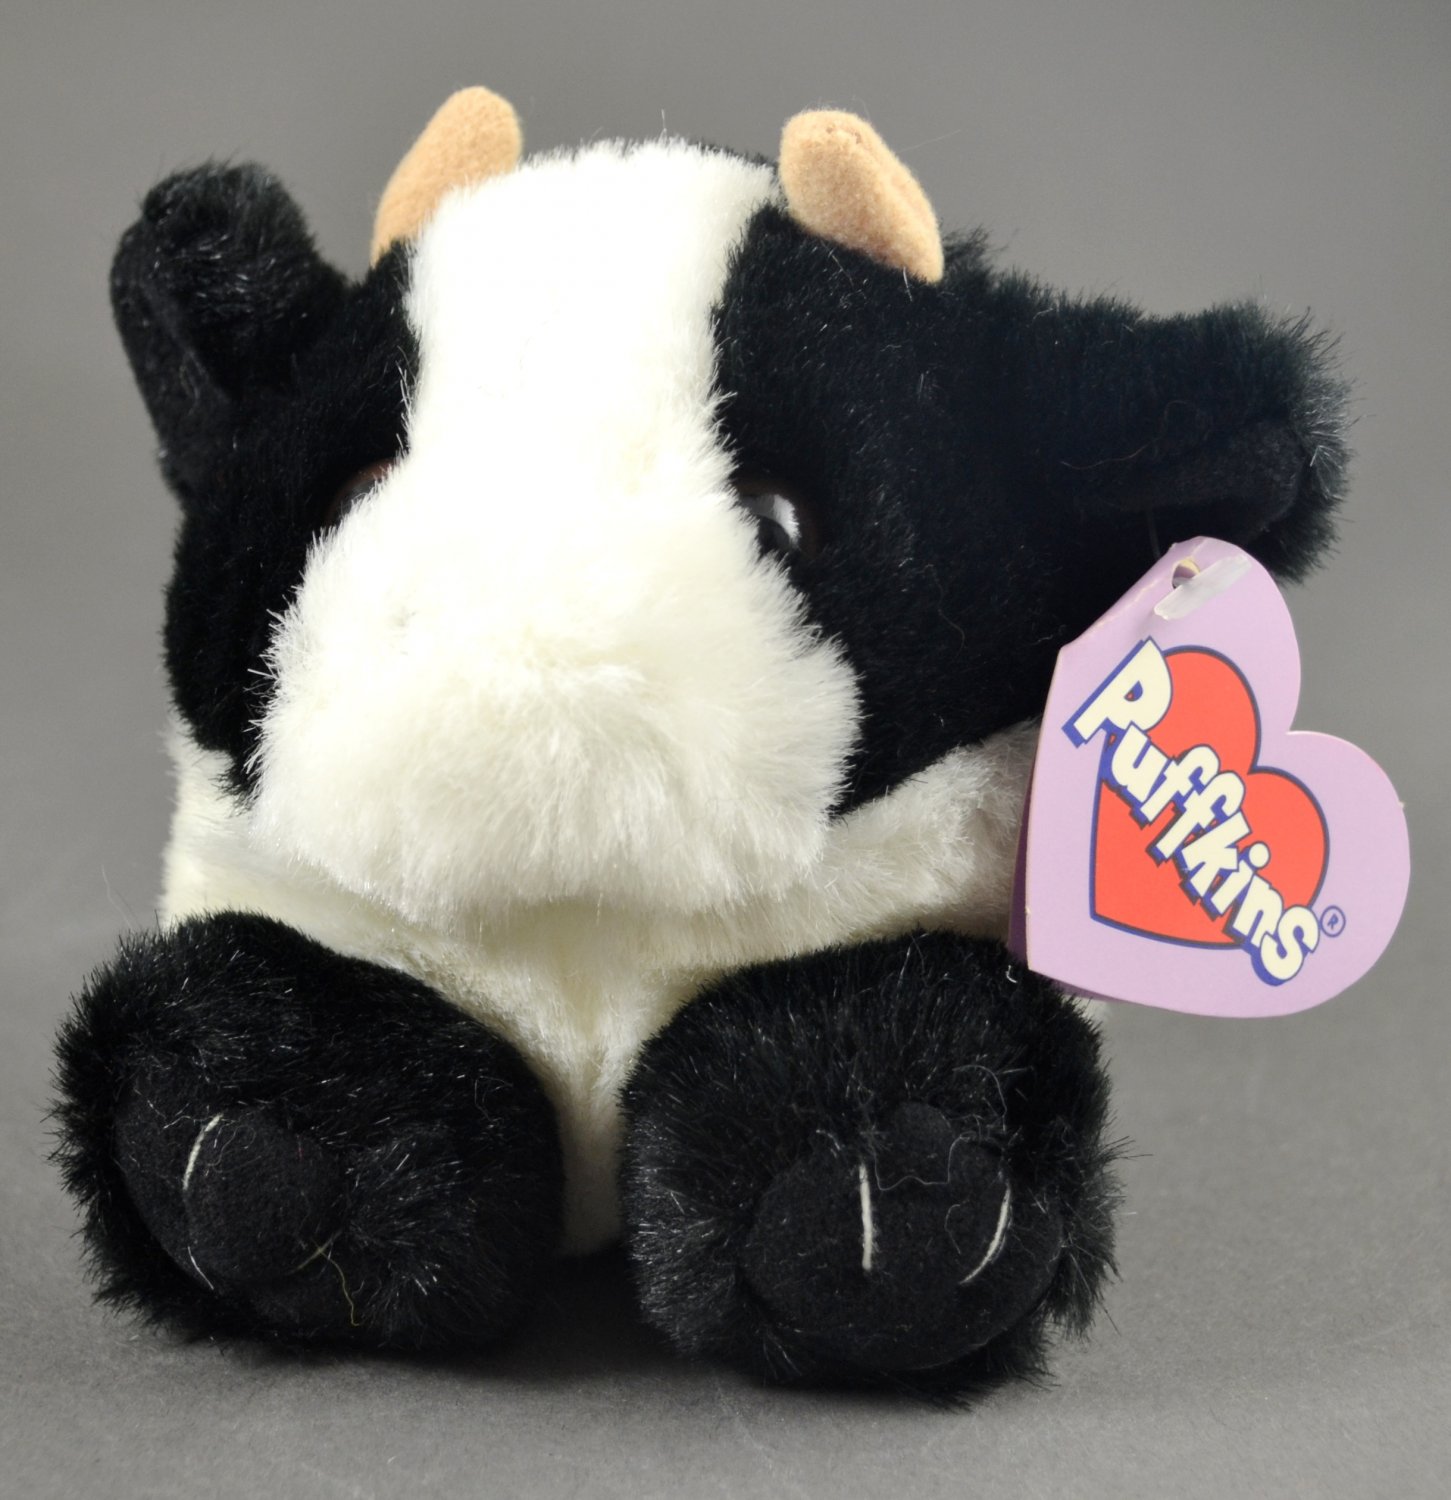 Meadow the Cow Puffkins by Swibco Style 6624 Bean Bag Plush